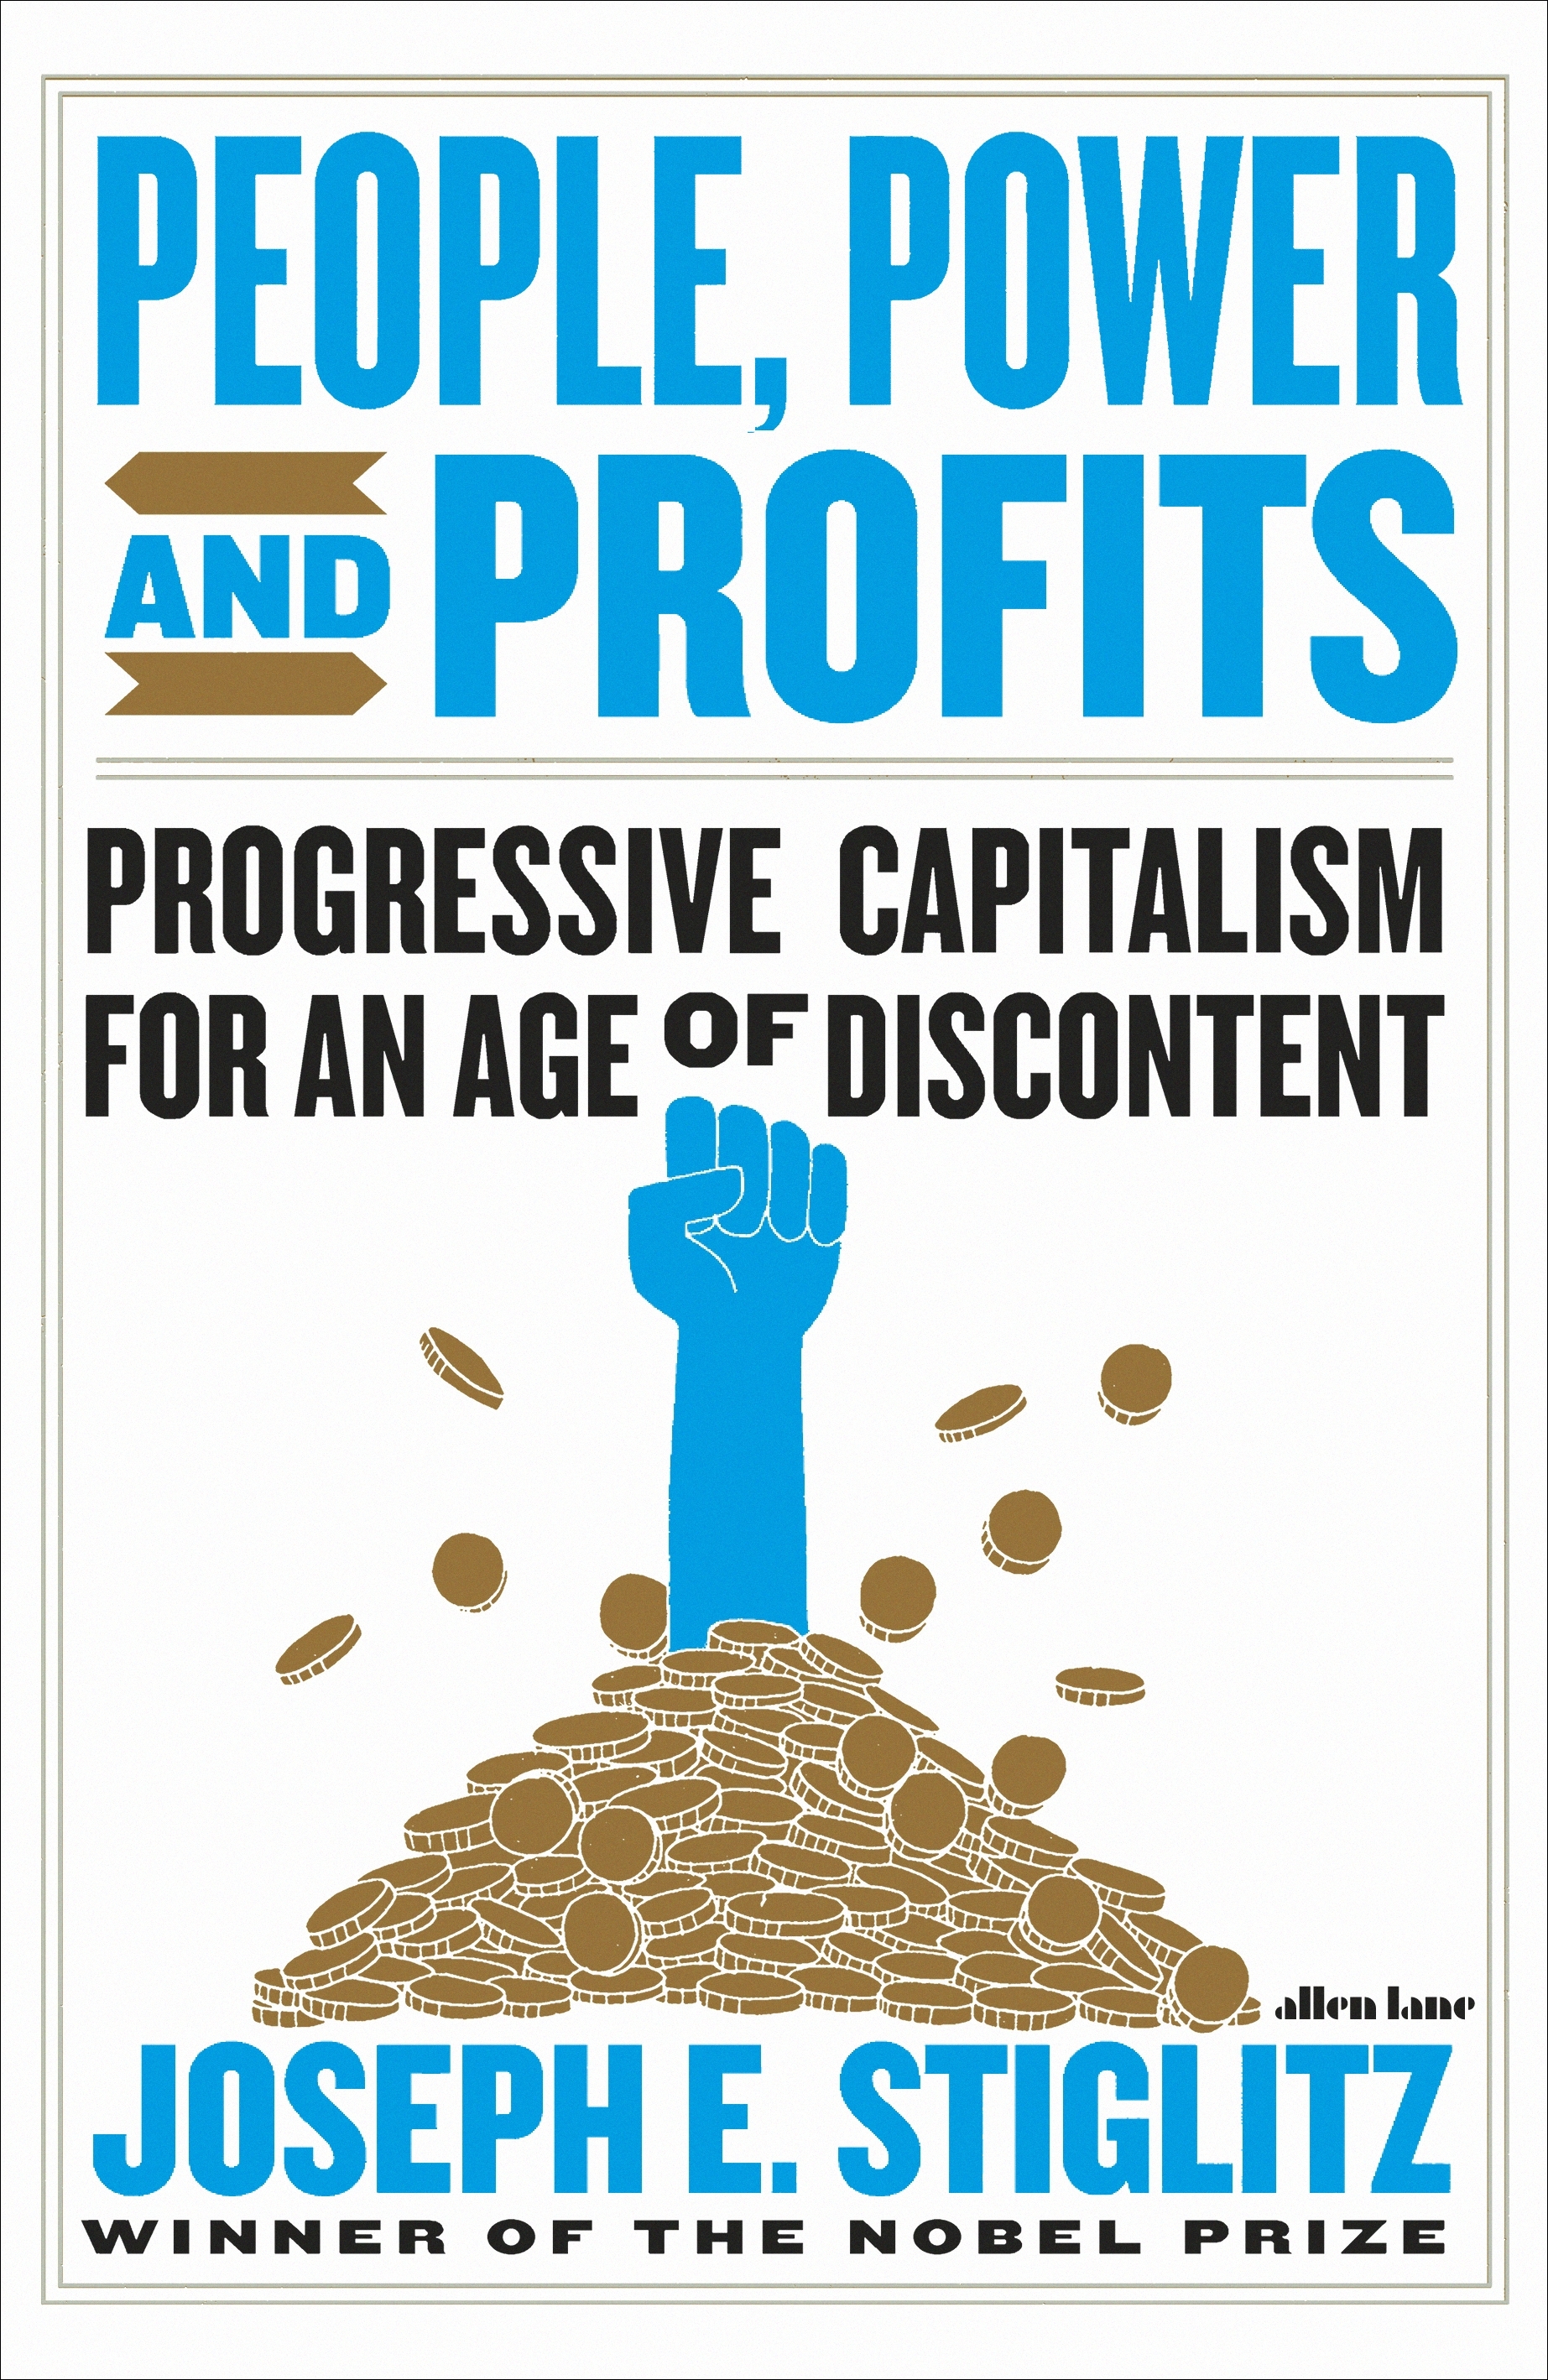 “People, Power, and Profits: Progressive Capitalism for an Age of Discontent.”